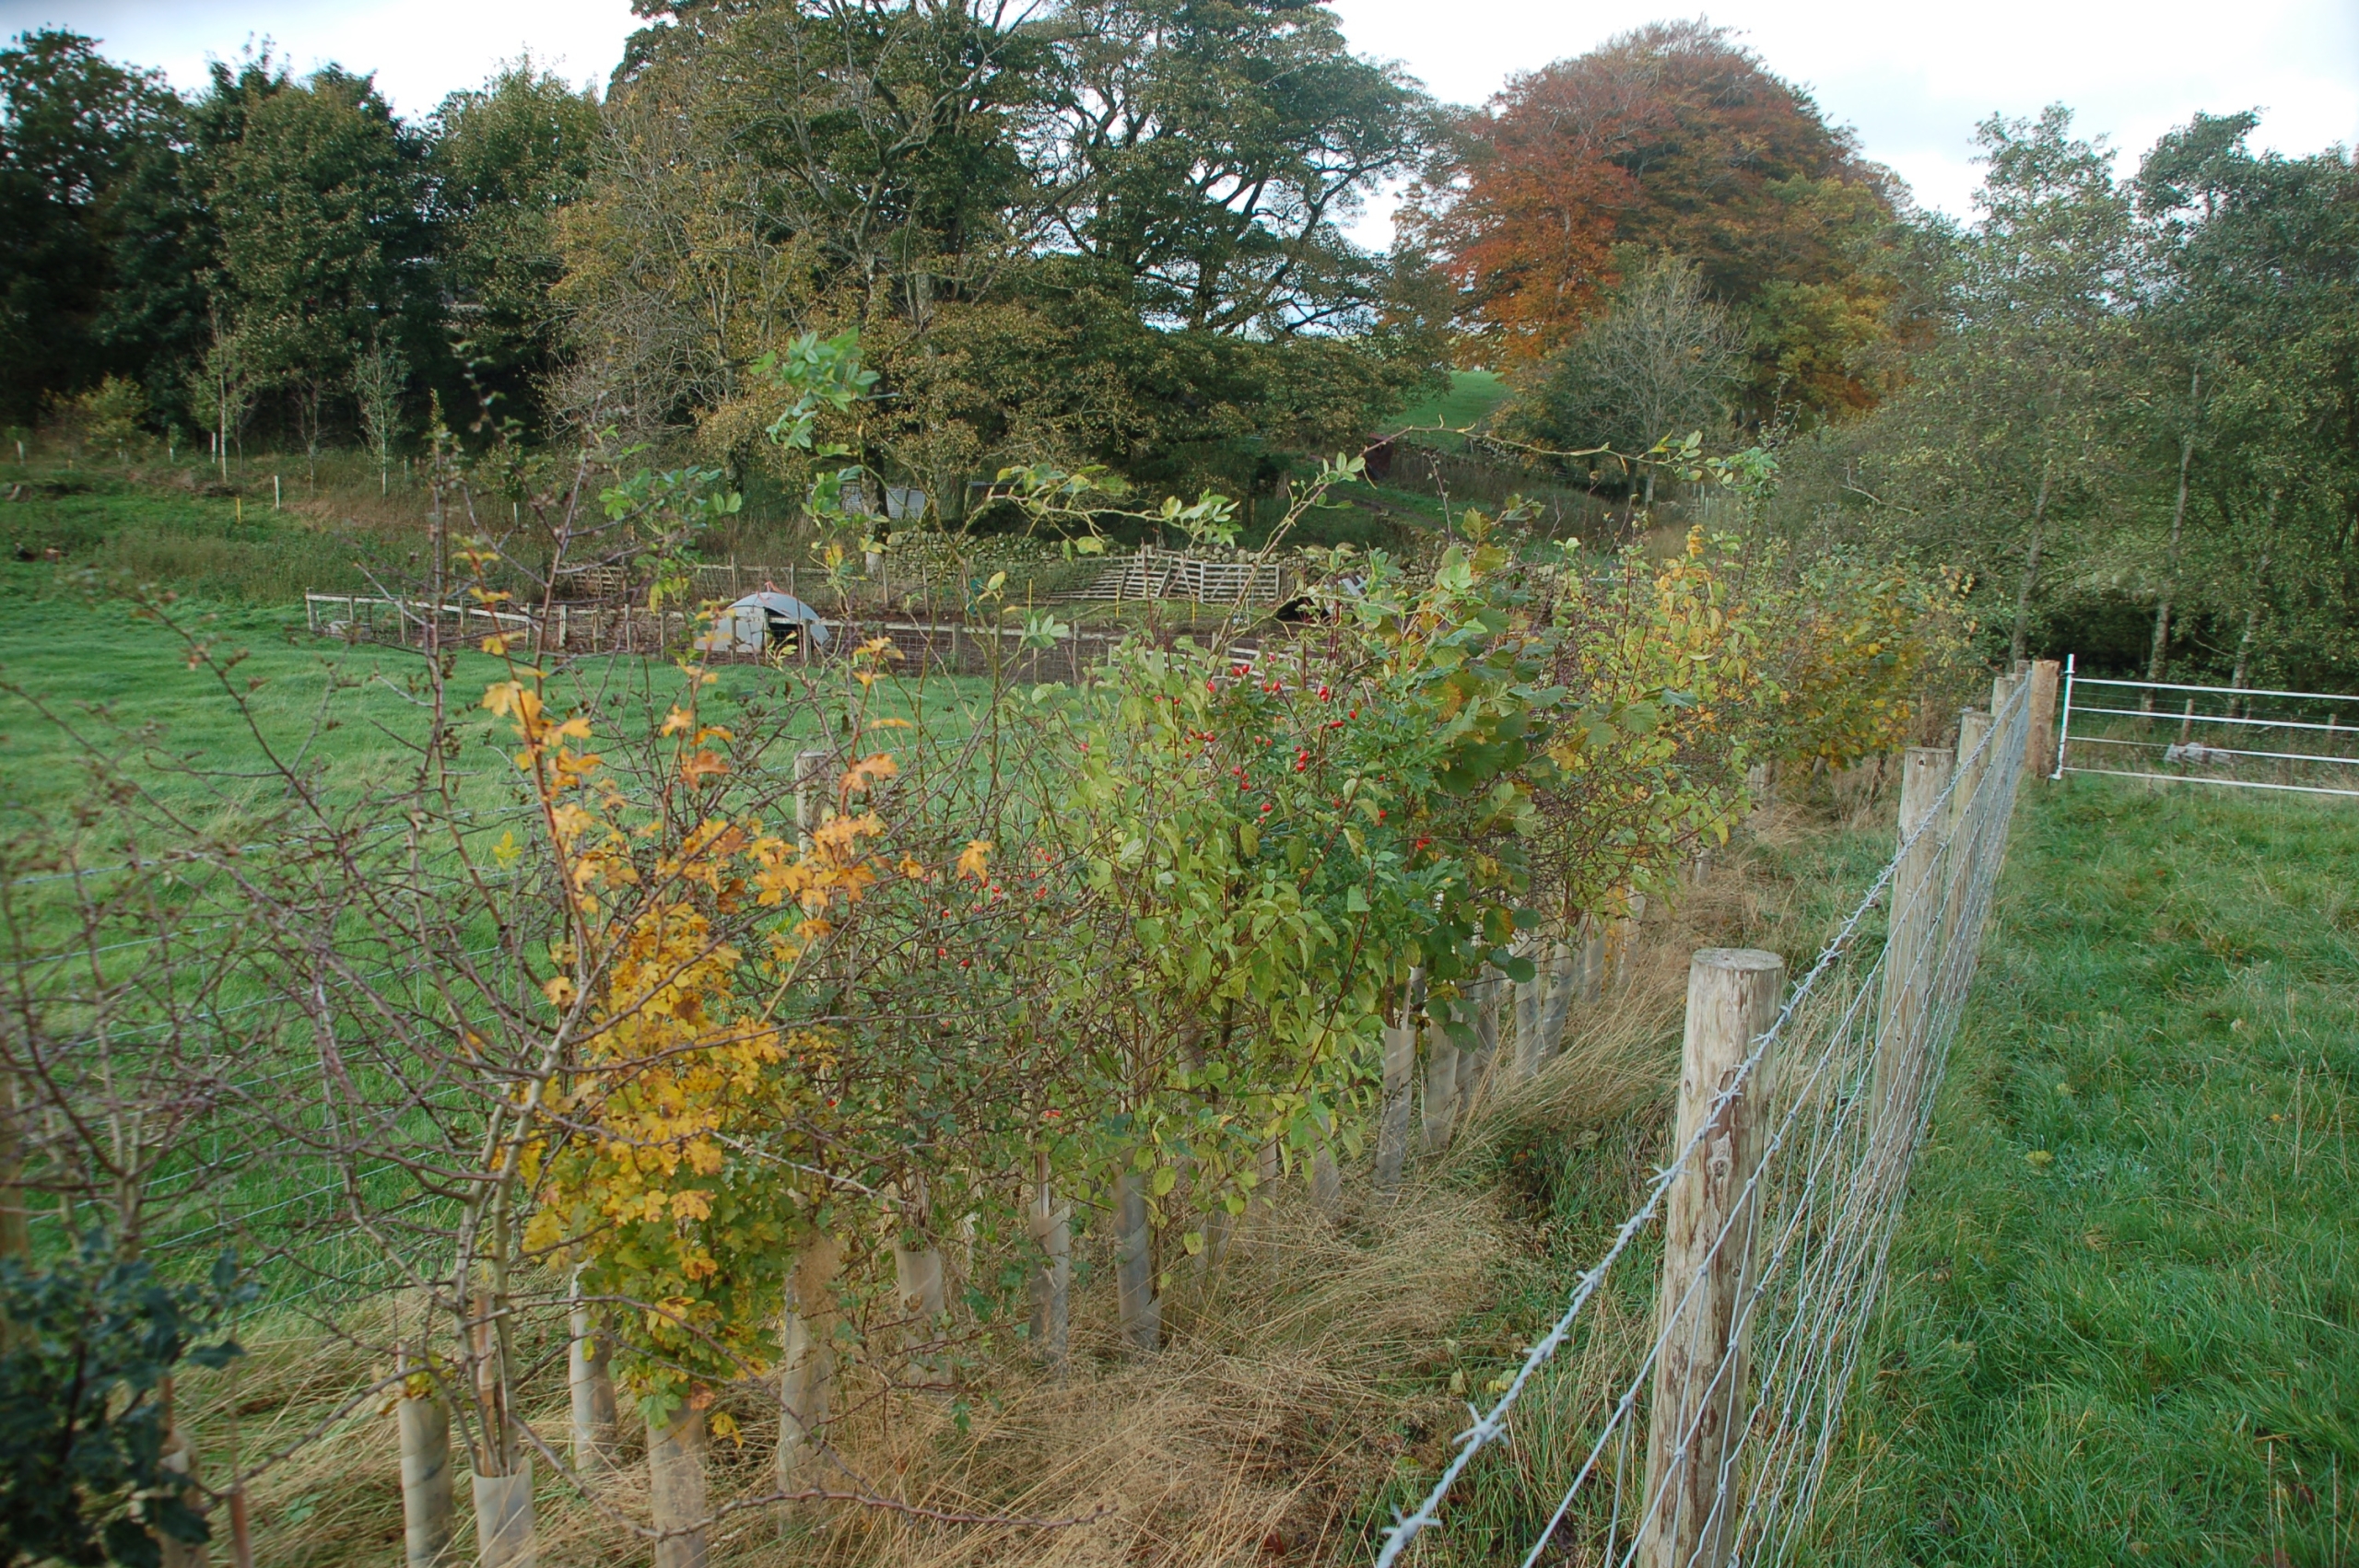 A more recently planted hedgerow of many native species